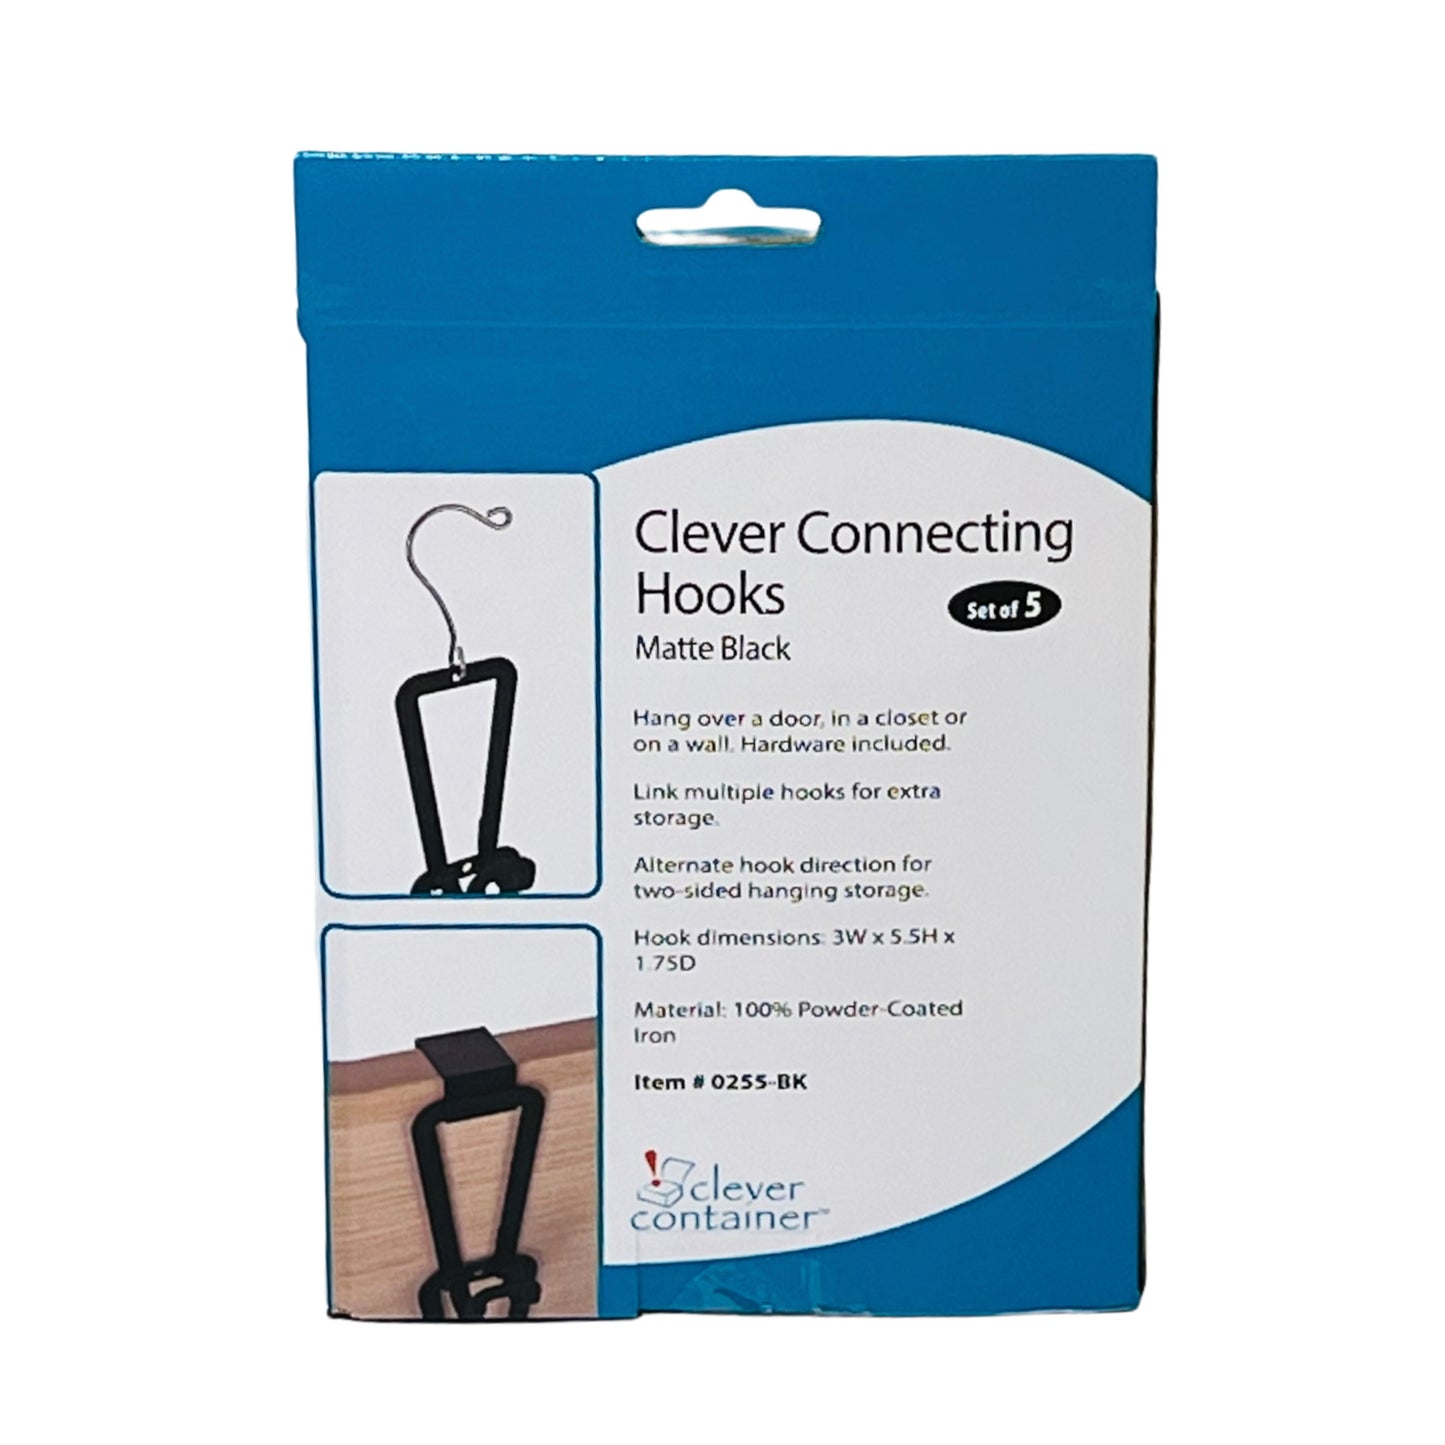 Clever Connecting Hooks - Black - Set of 5